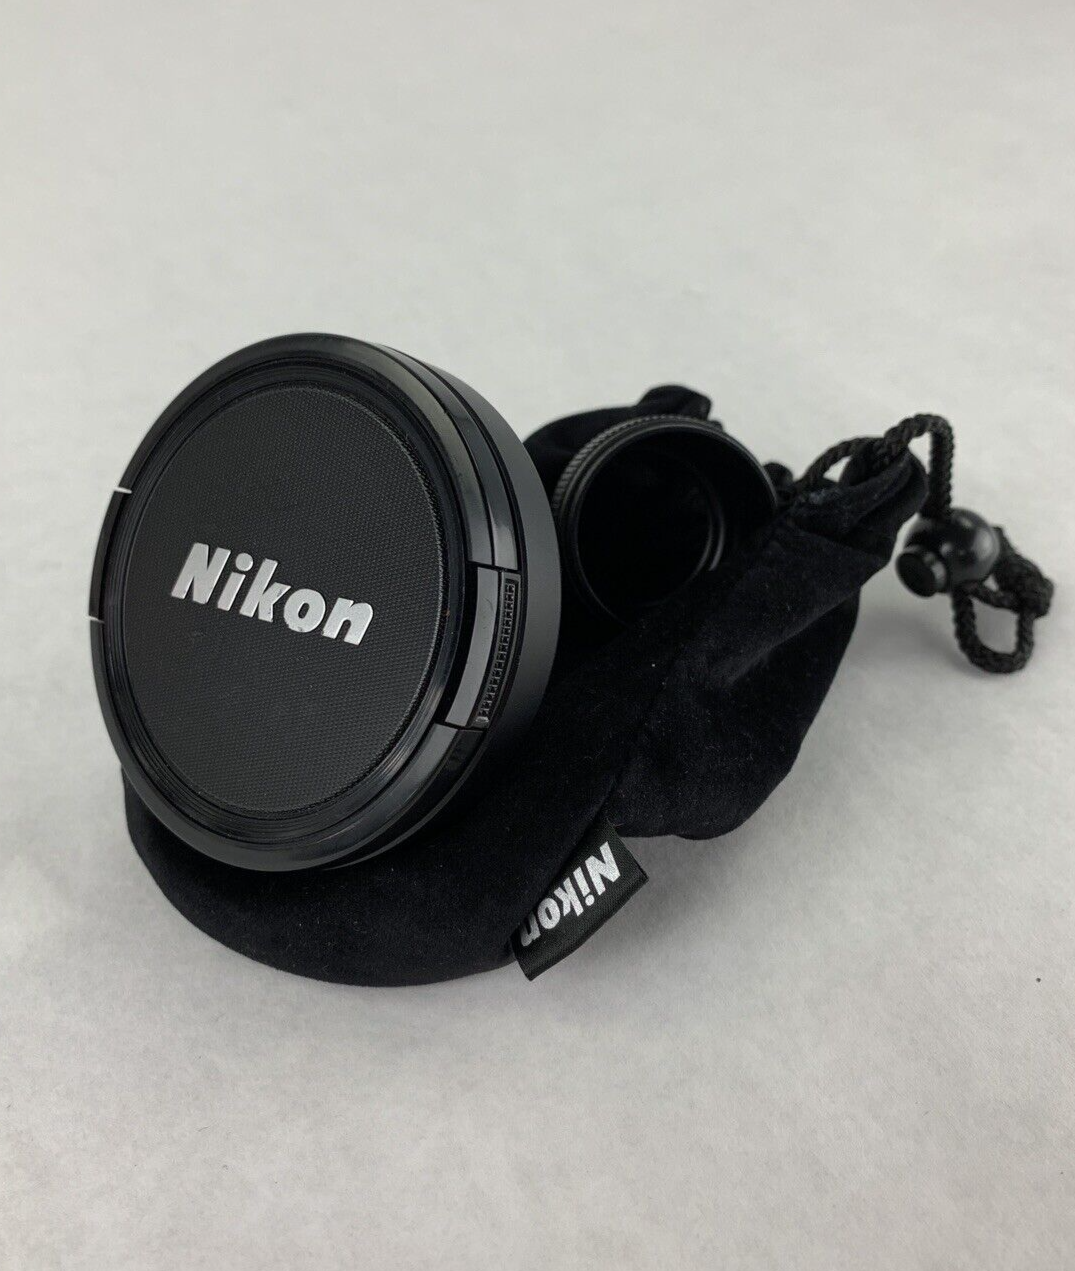 Nikon Wide Converter WC-E63 0.63x with Felt Case and Protective Covers